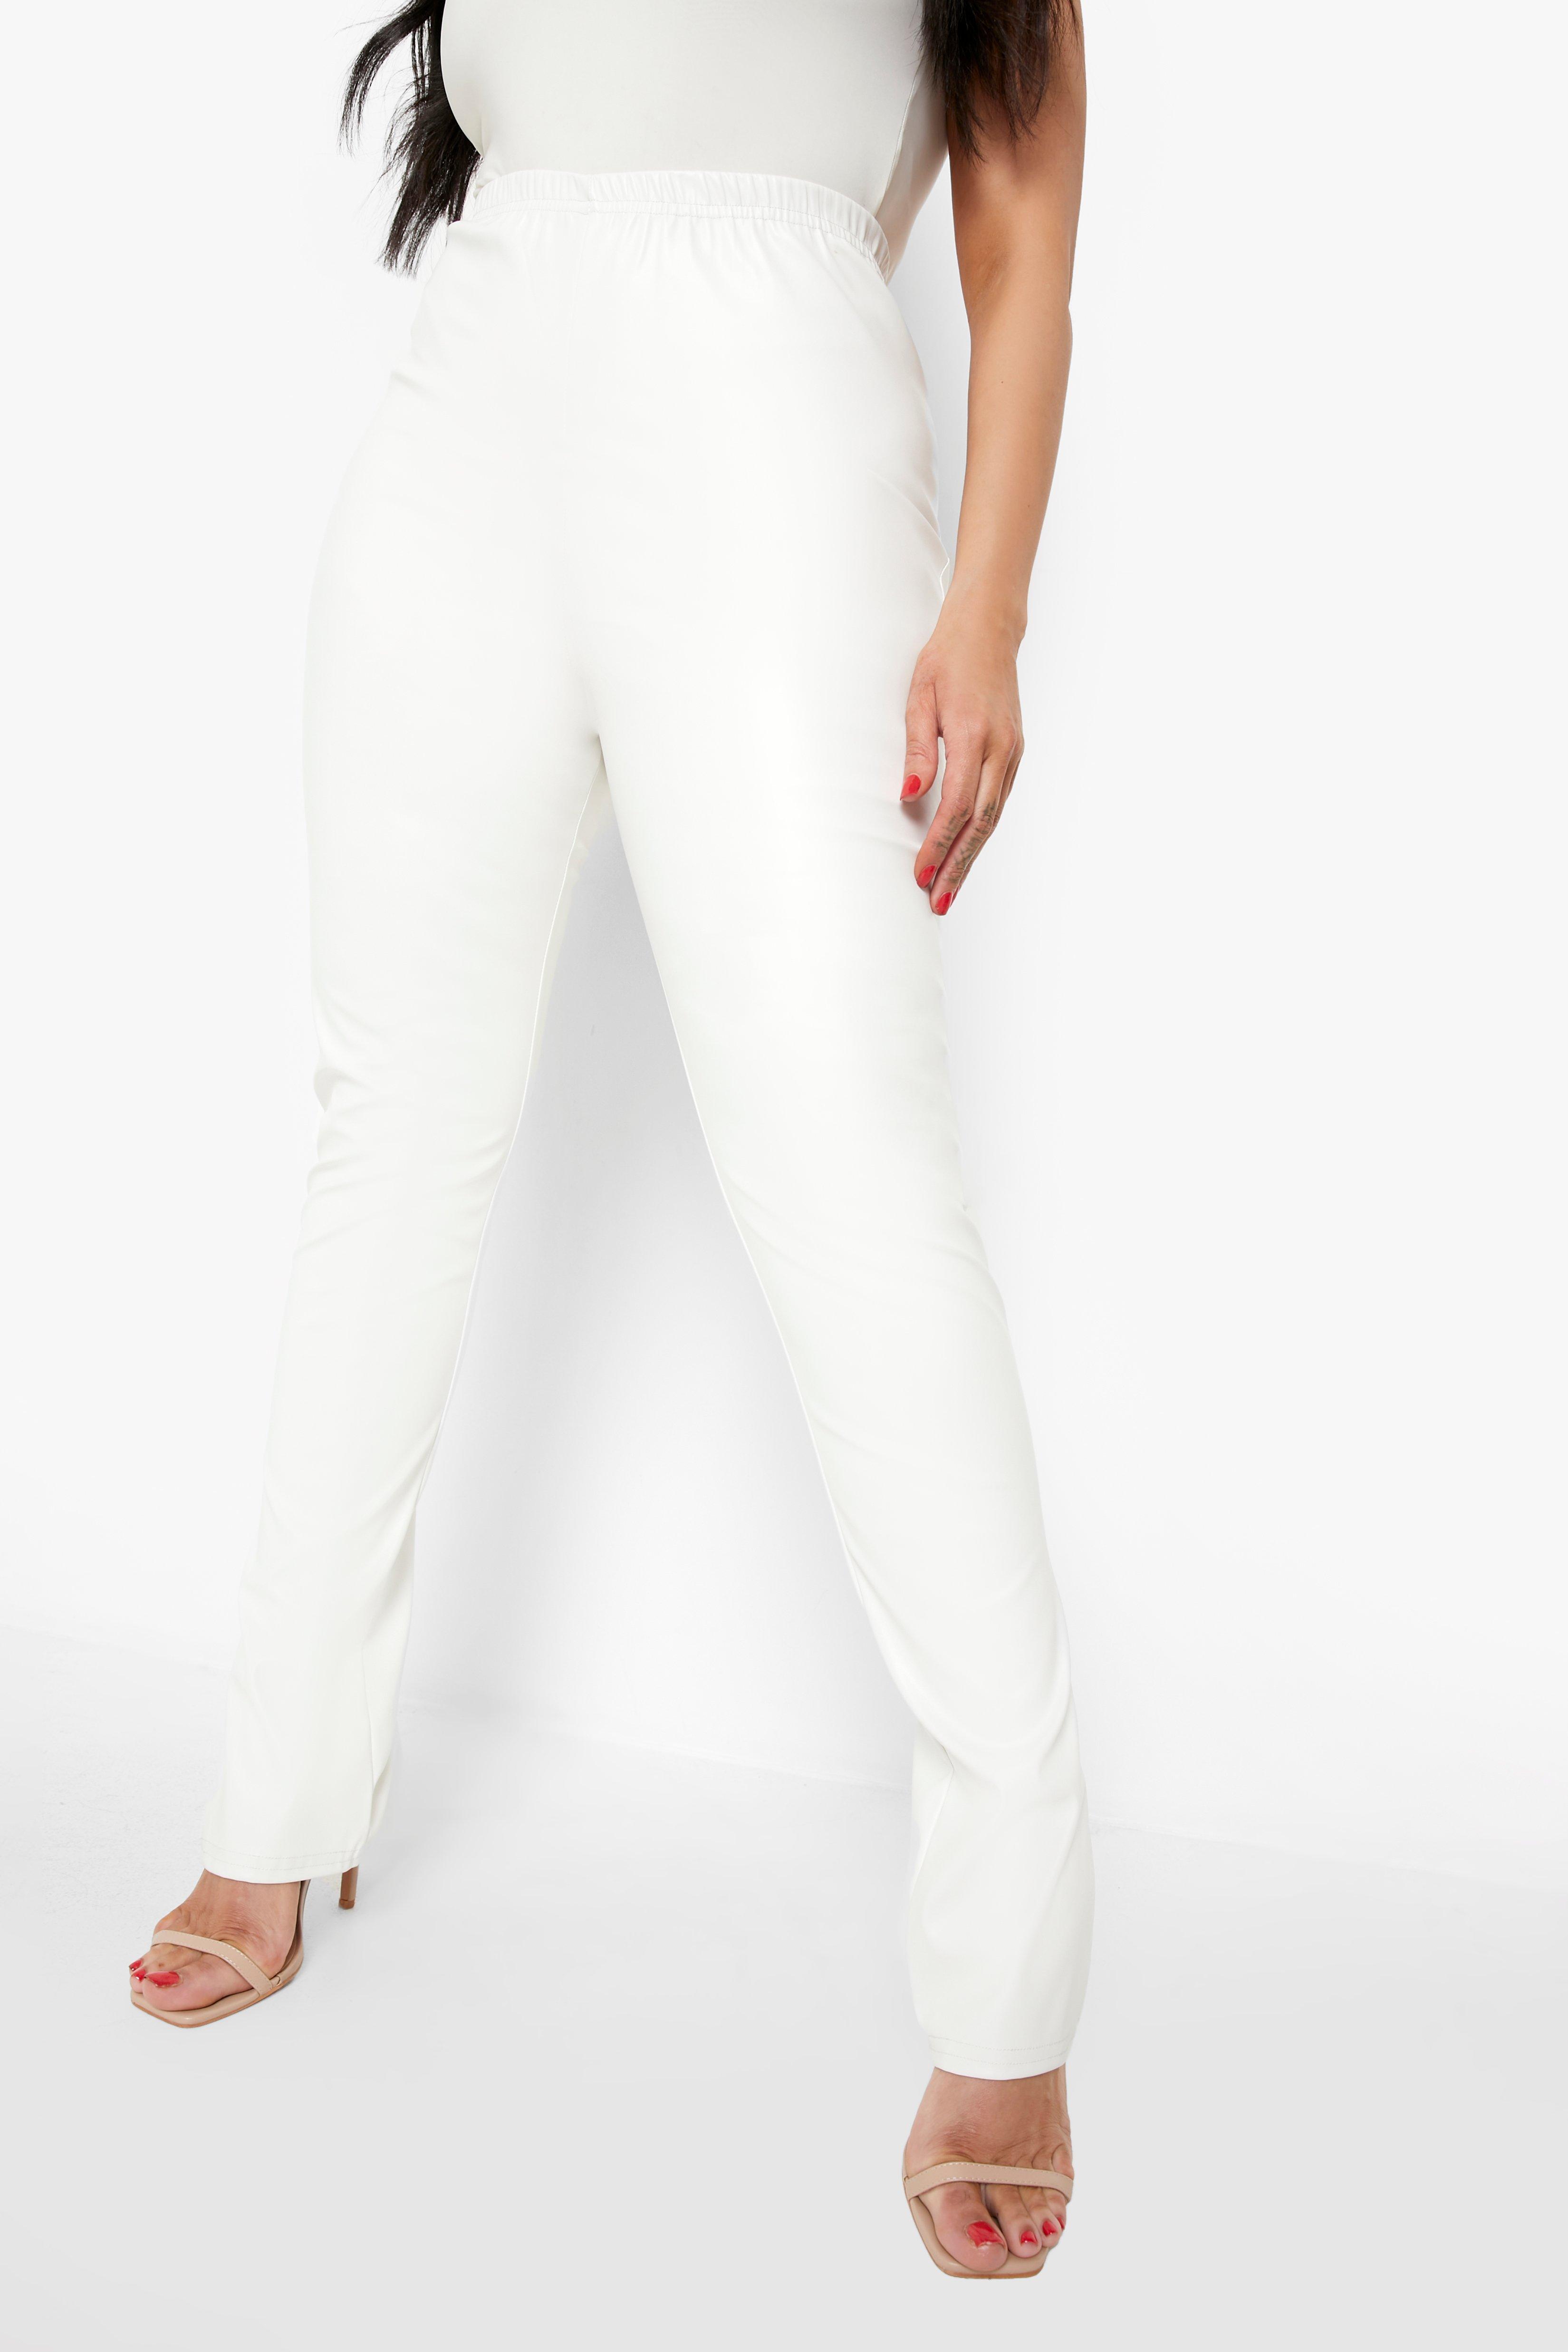 All Eyes On You Faux Leather Leggings - Ivory